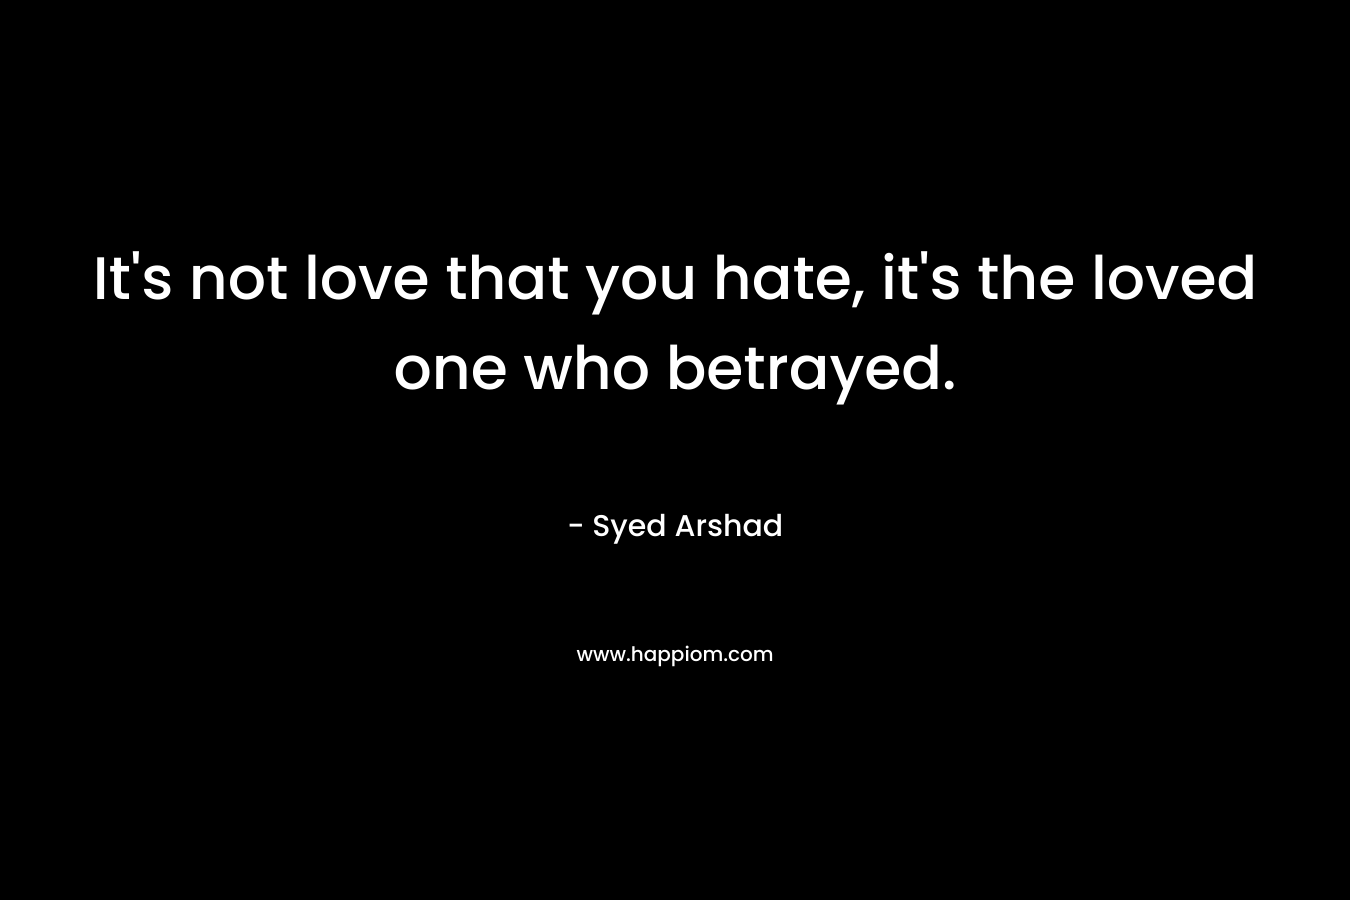 It's not love that you hate, it's the loved one who betrayed.